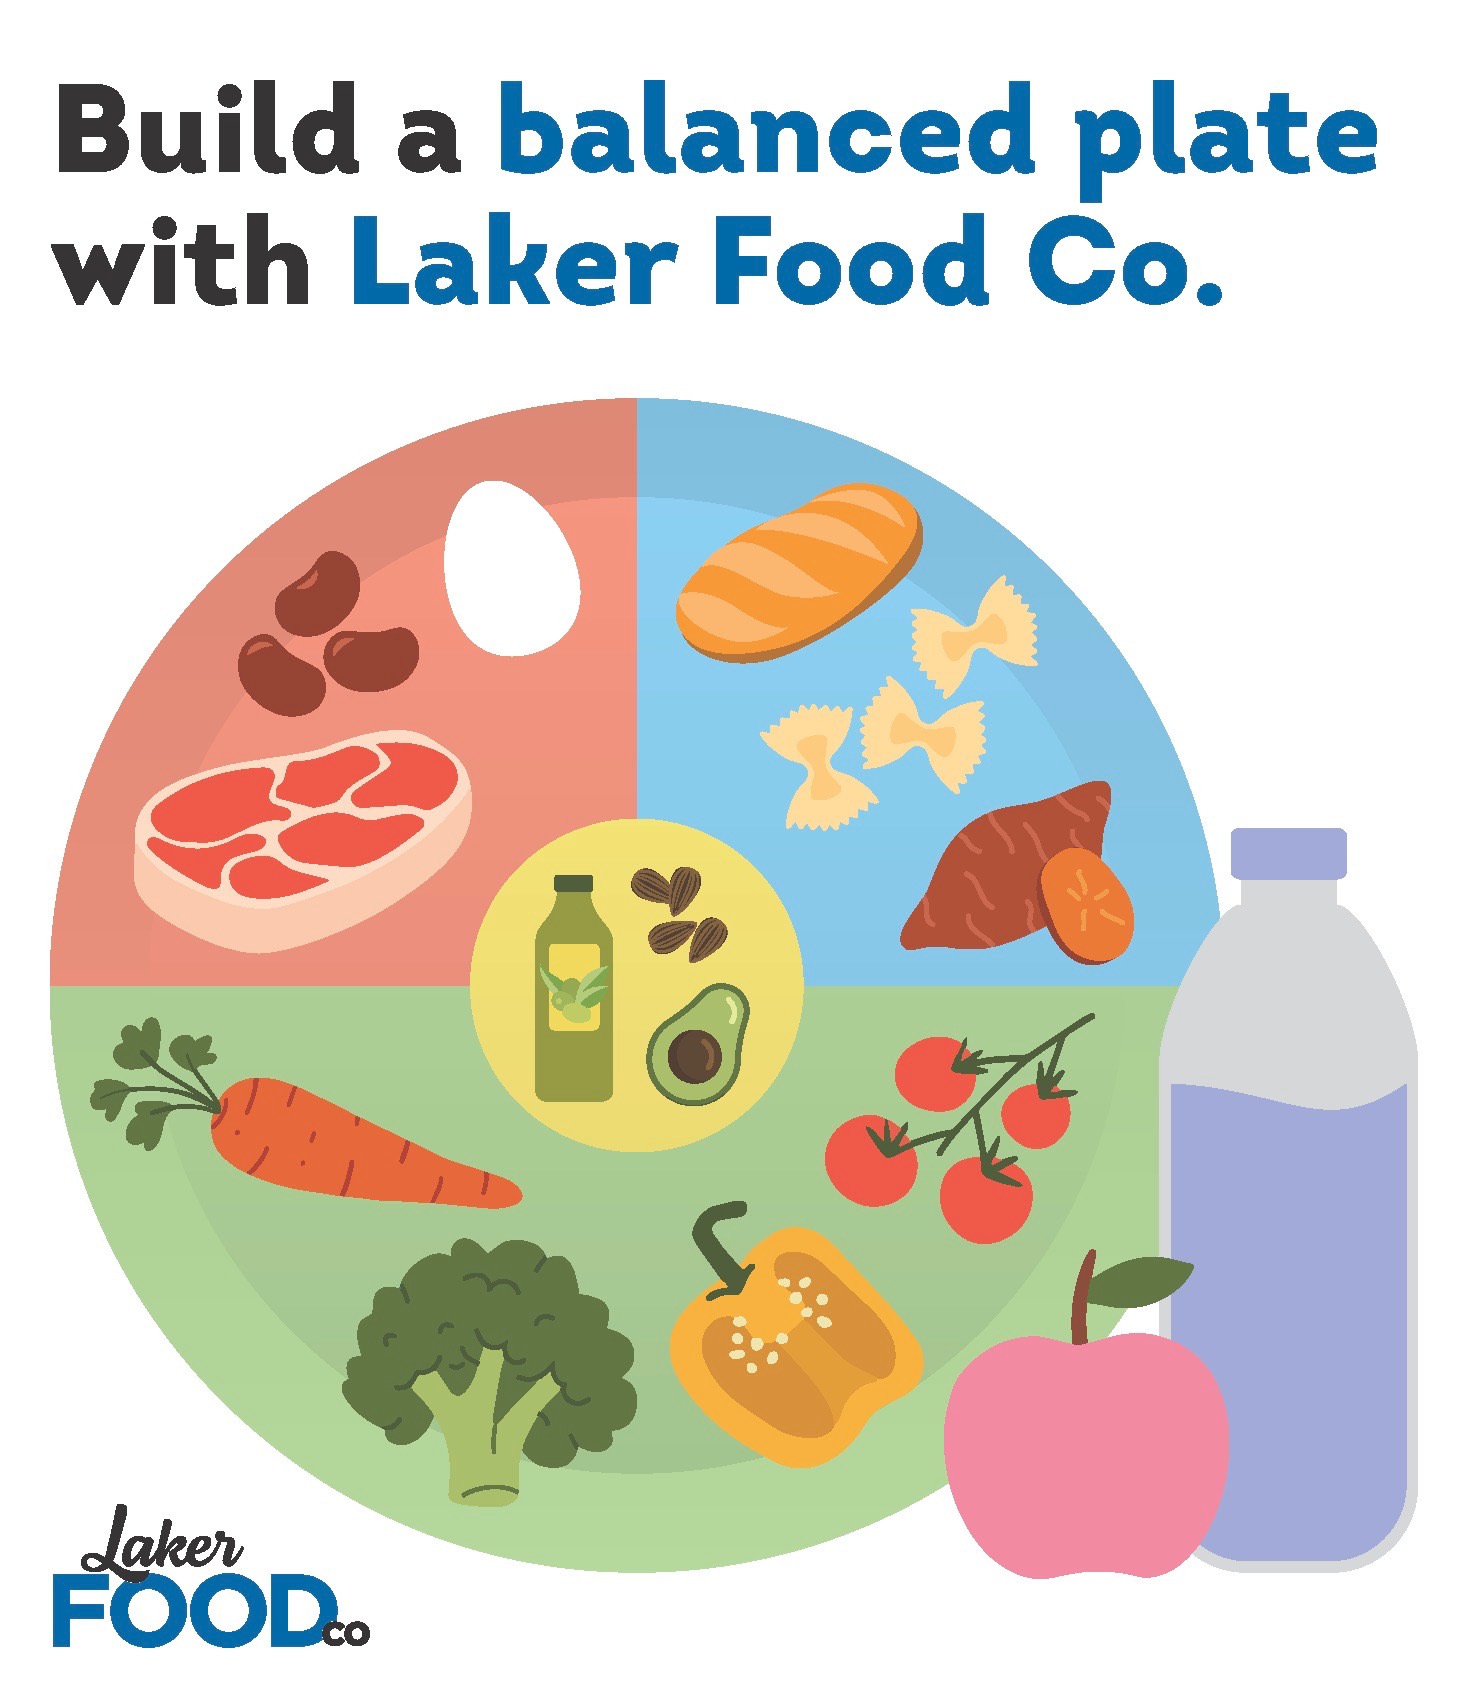 Build a Balanced Plate with Laker Food Co.